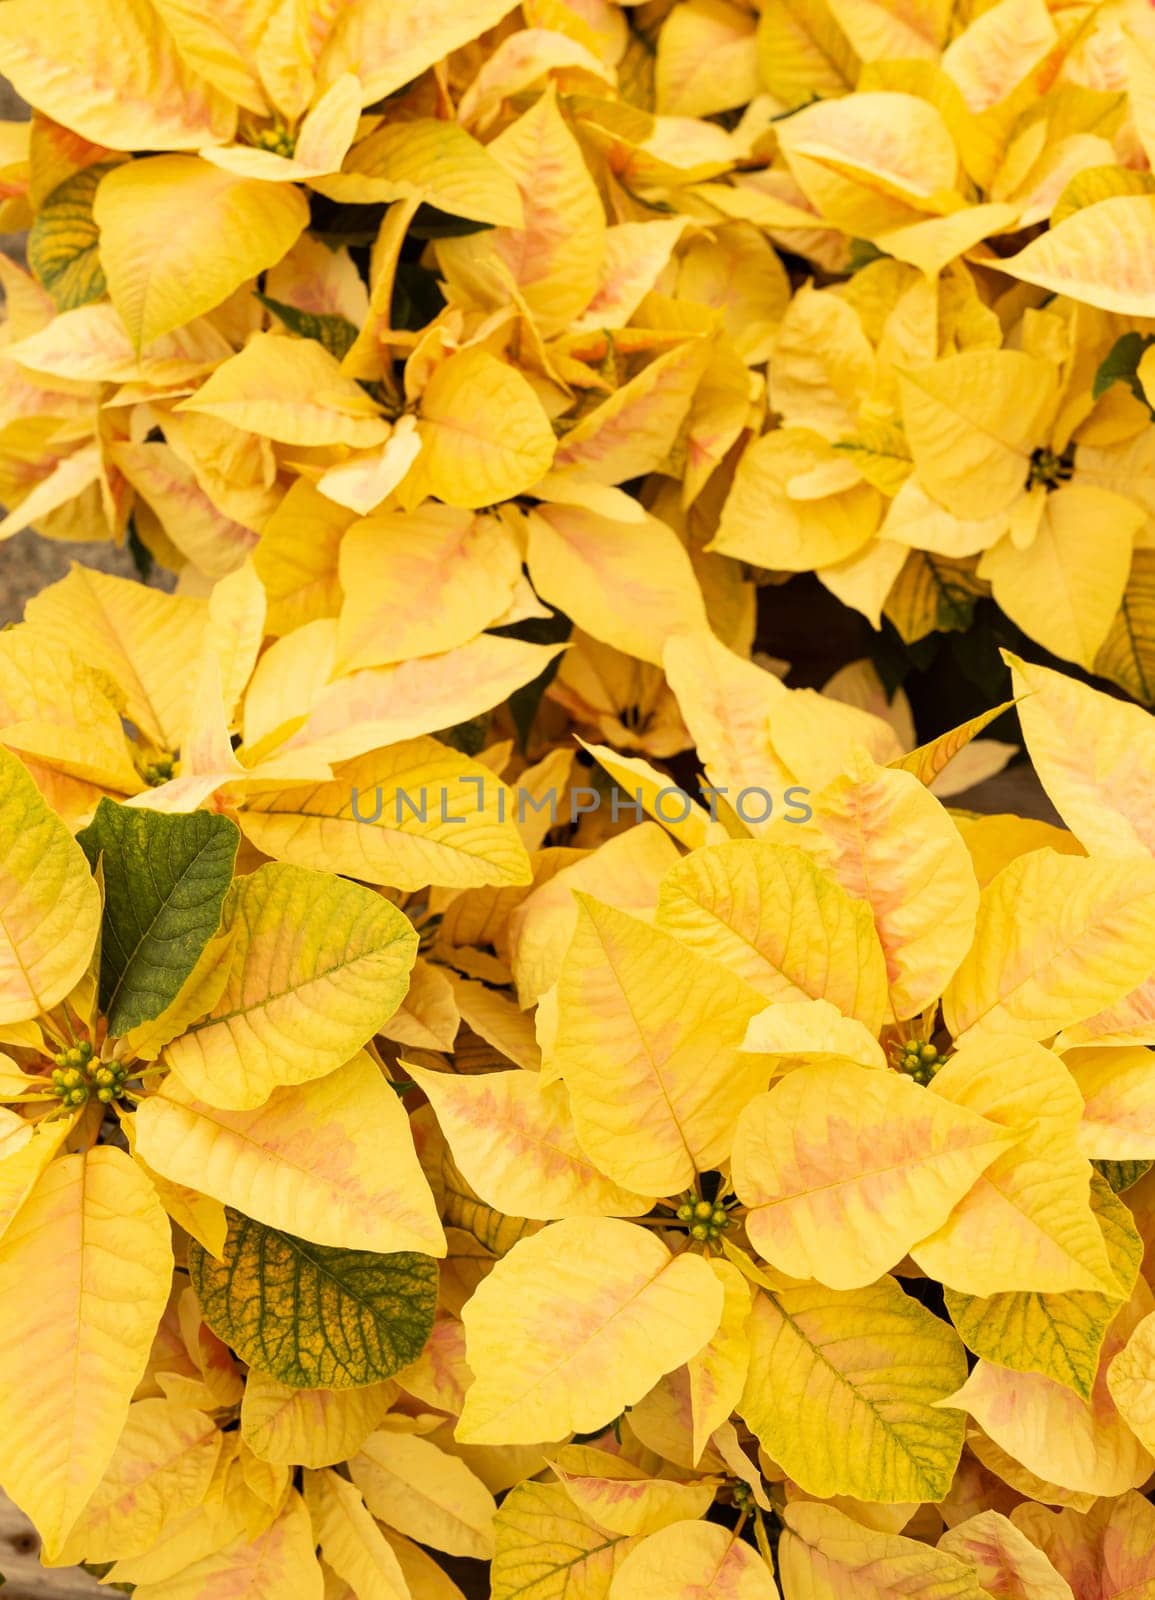 Many Yellow Pink Eckespoint Poinsettia Freedom Marble Plant, Potted Home Flower. Floral Backdrop. Christmas Eve Plant. Vertical Plane by netatsi